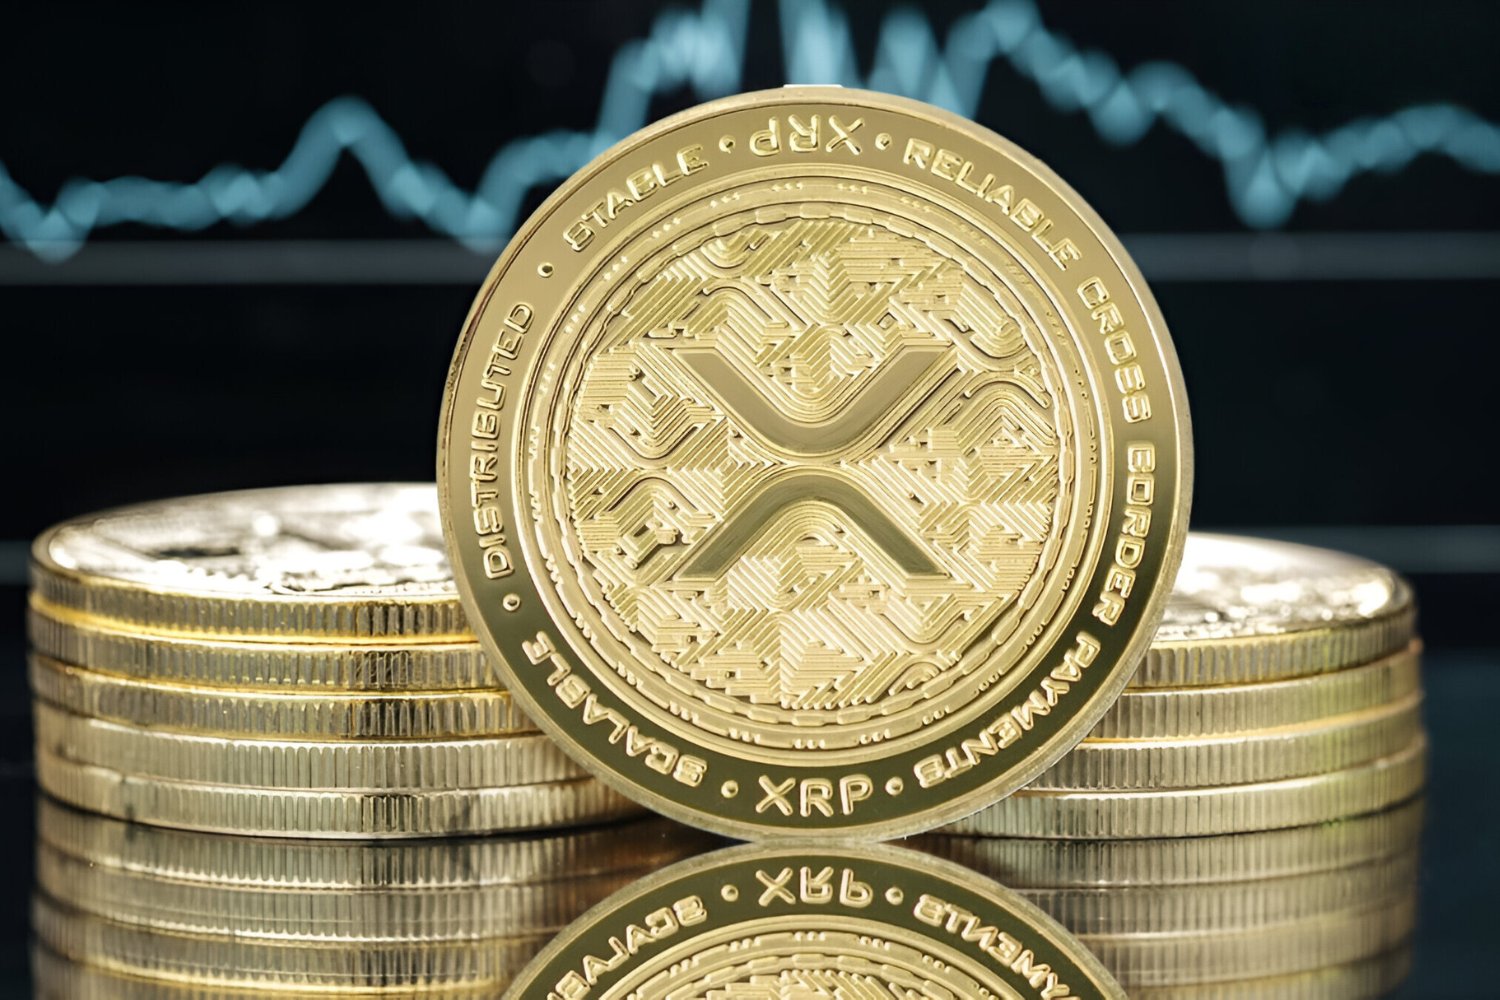 Where Can I Buy Xrp Crypto